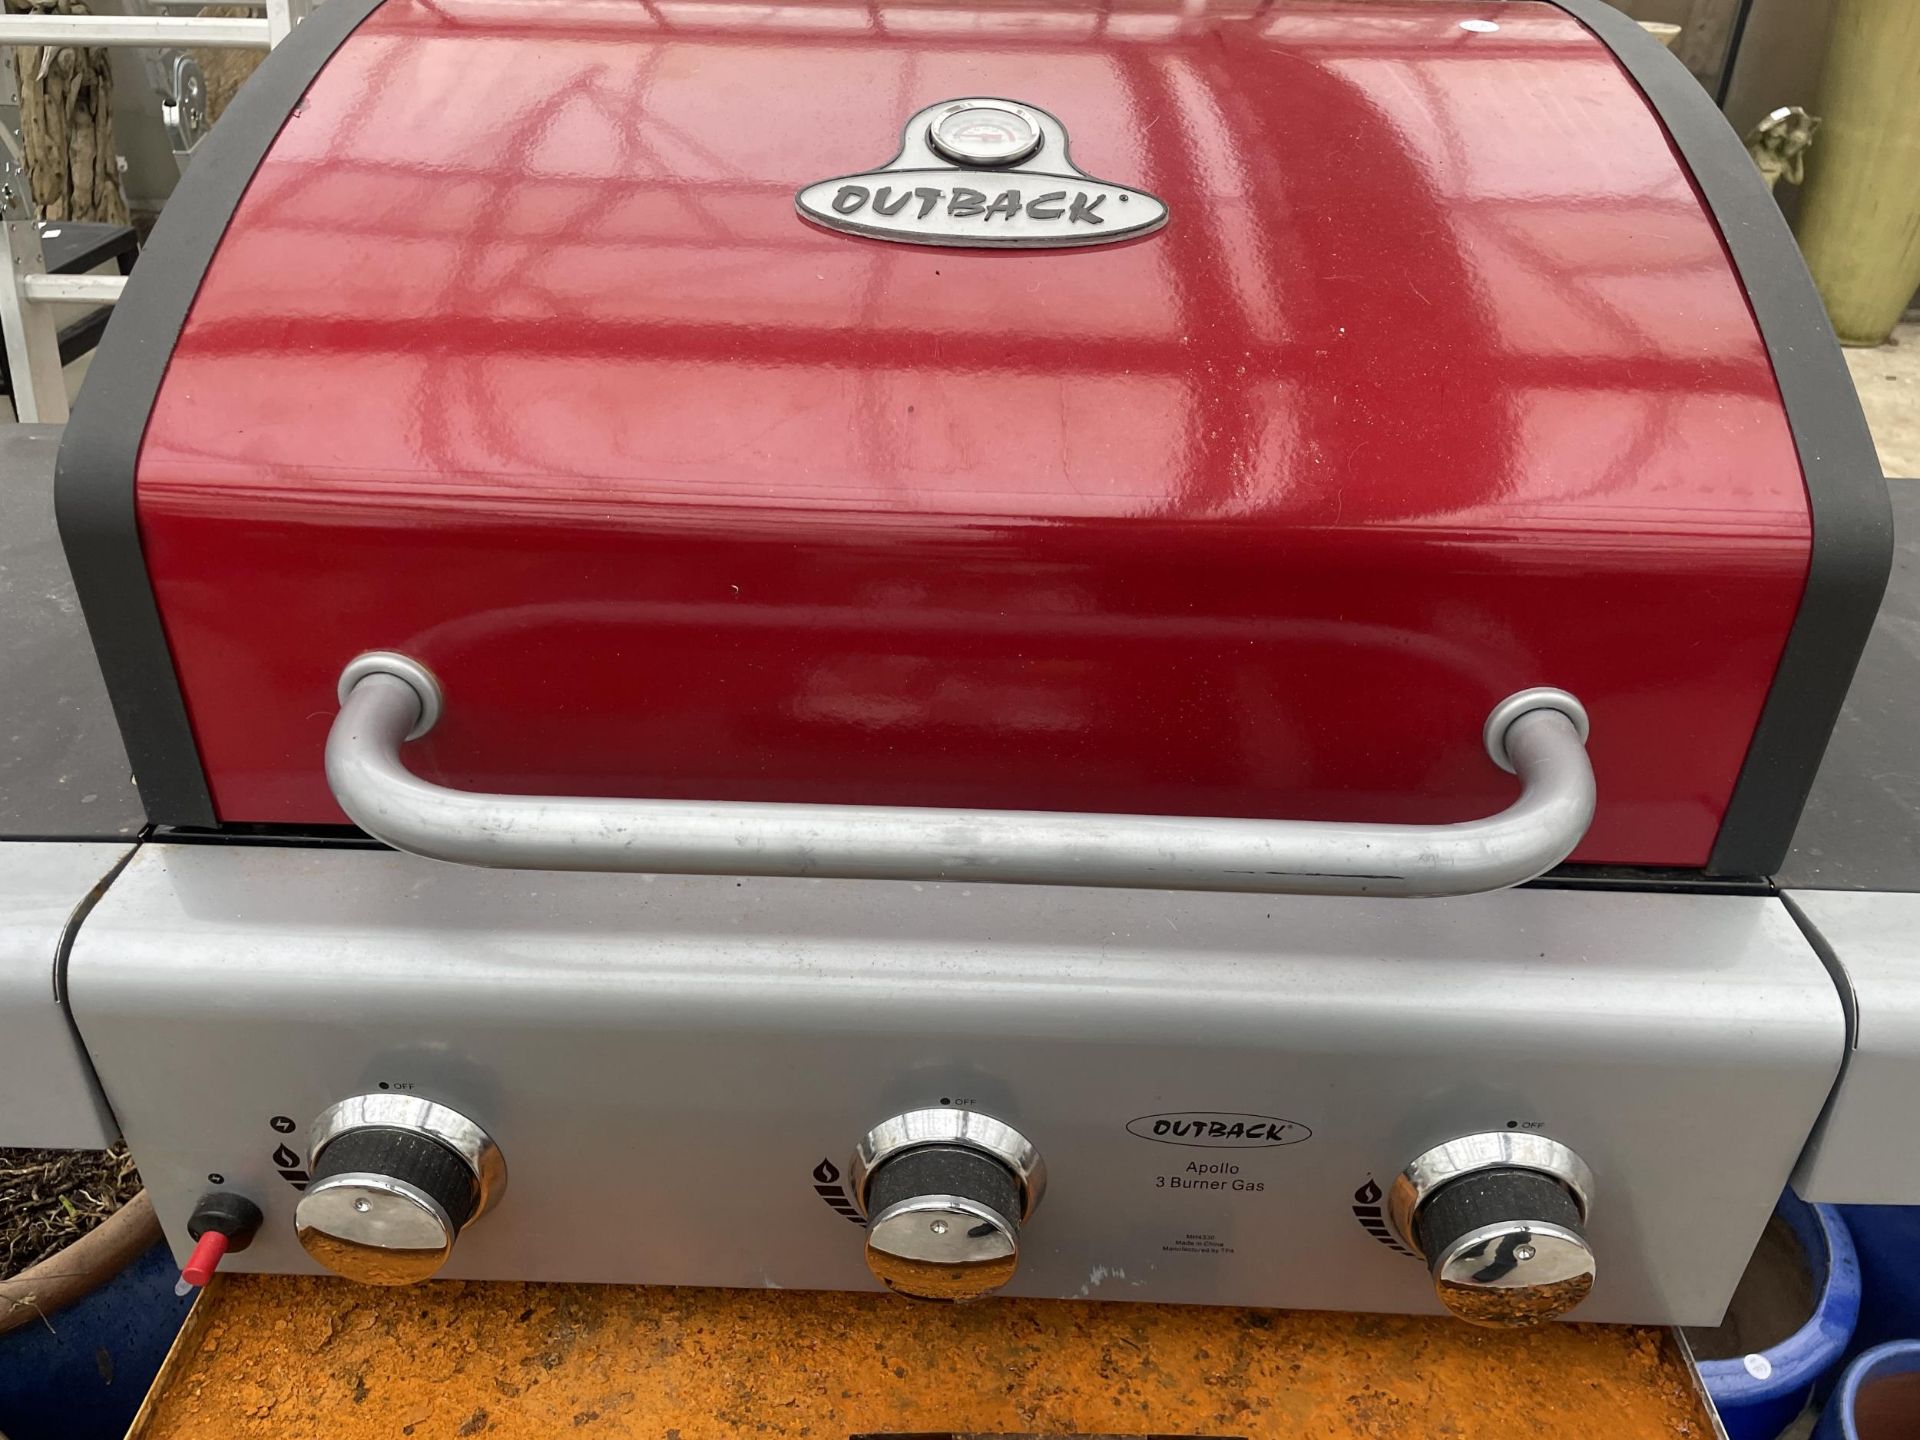 AN OUTBACK APOLLO THREE BURNER GAS BBQ - Image 2 of 3